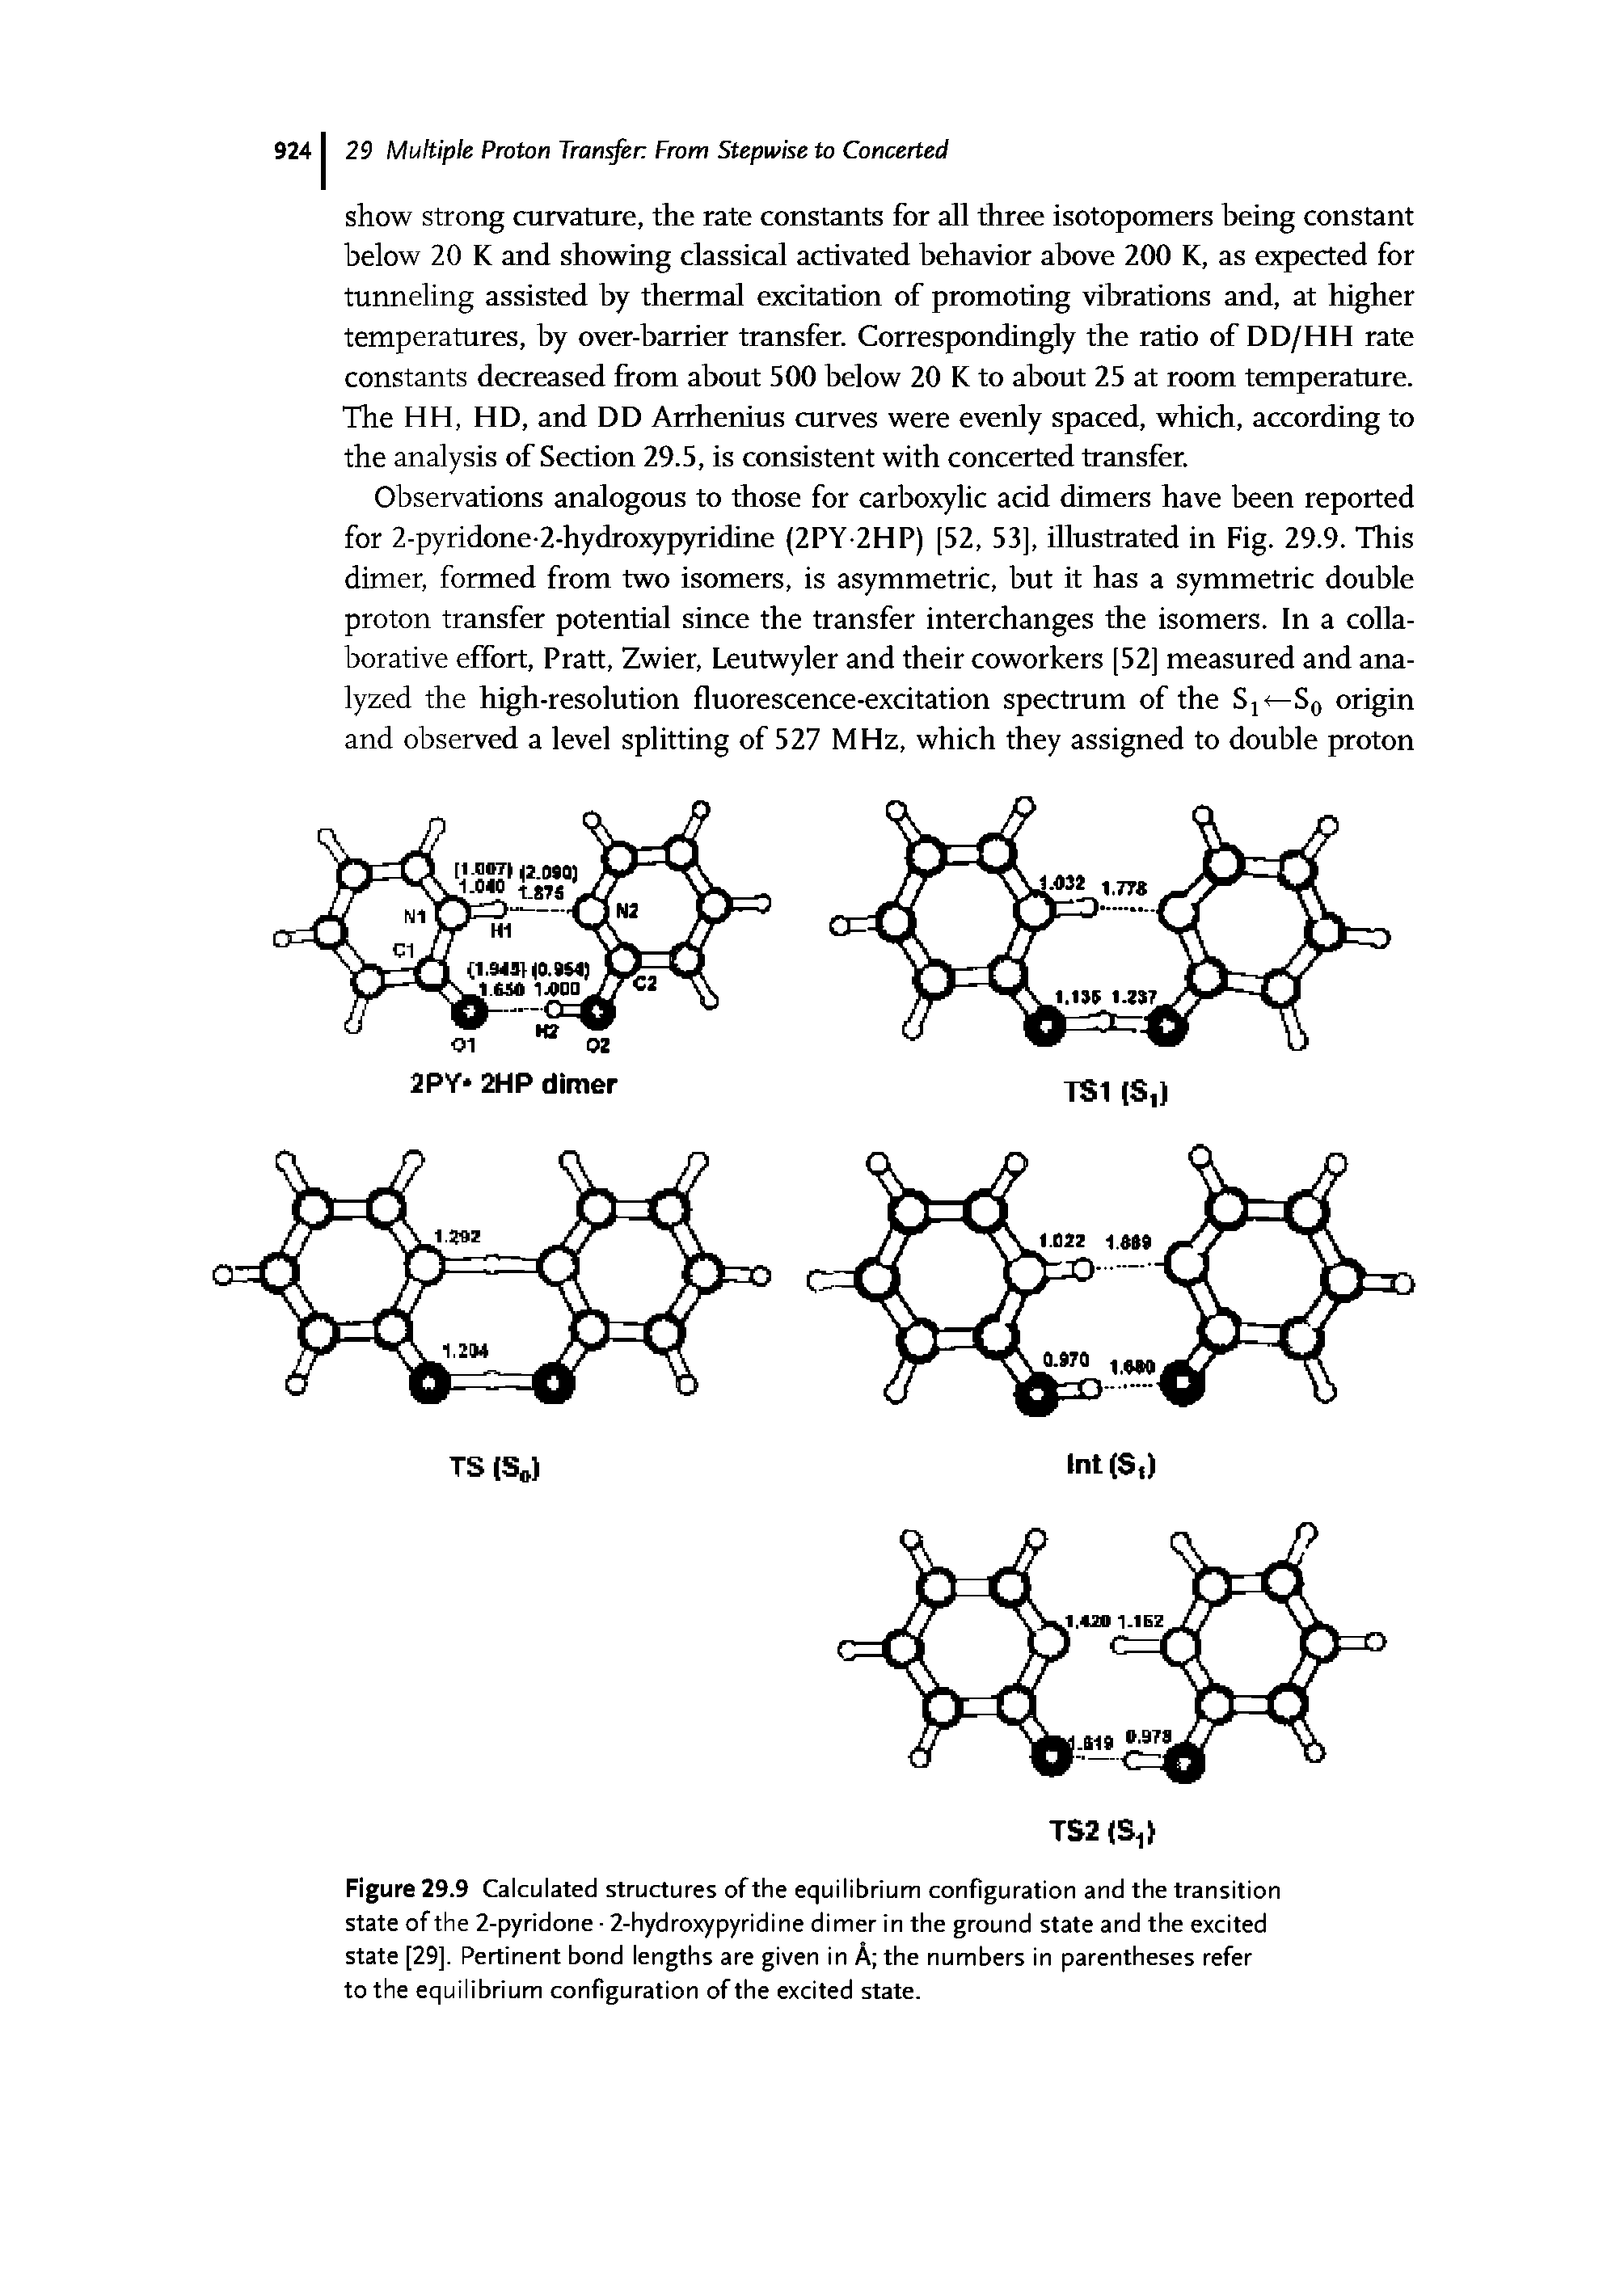 Figure 29.9 Calculated structures of the equilibrium configuration and the transition state of the 2-pyridone 2-hydroxypyridine dimer in the ground state and the excited state [29], Pertinent bond lengths are given in A the numbers in parentheses refer to the equilibrium configuration of the excited state.